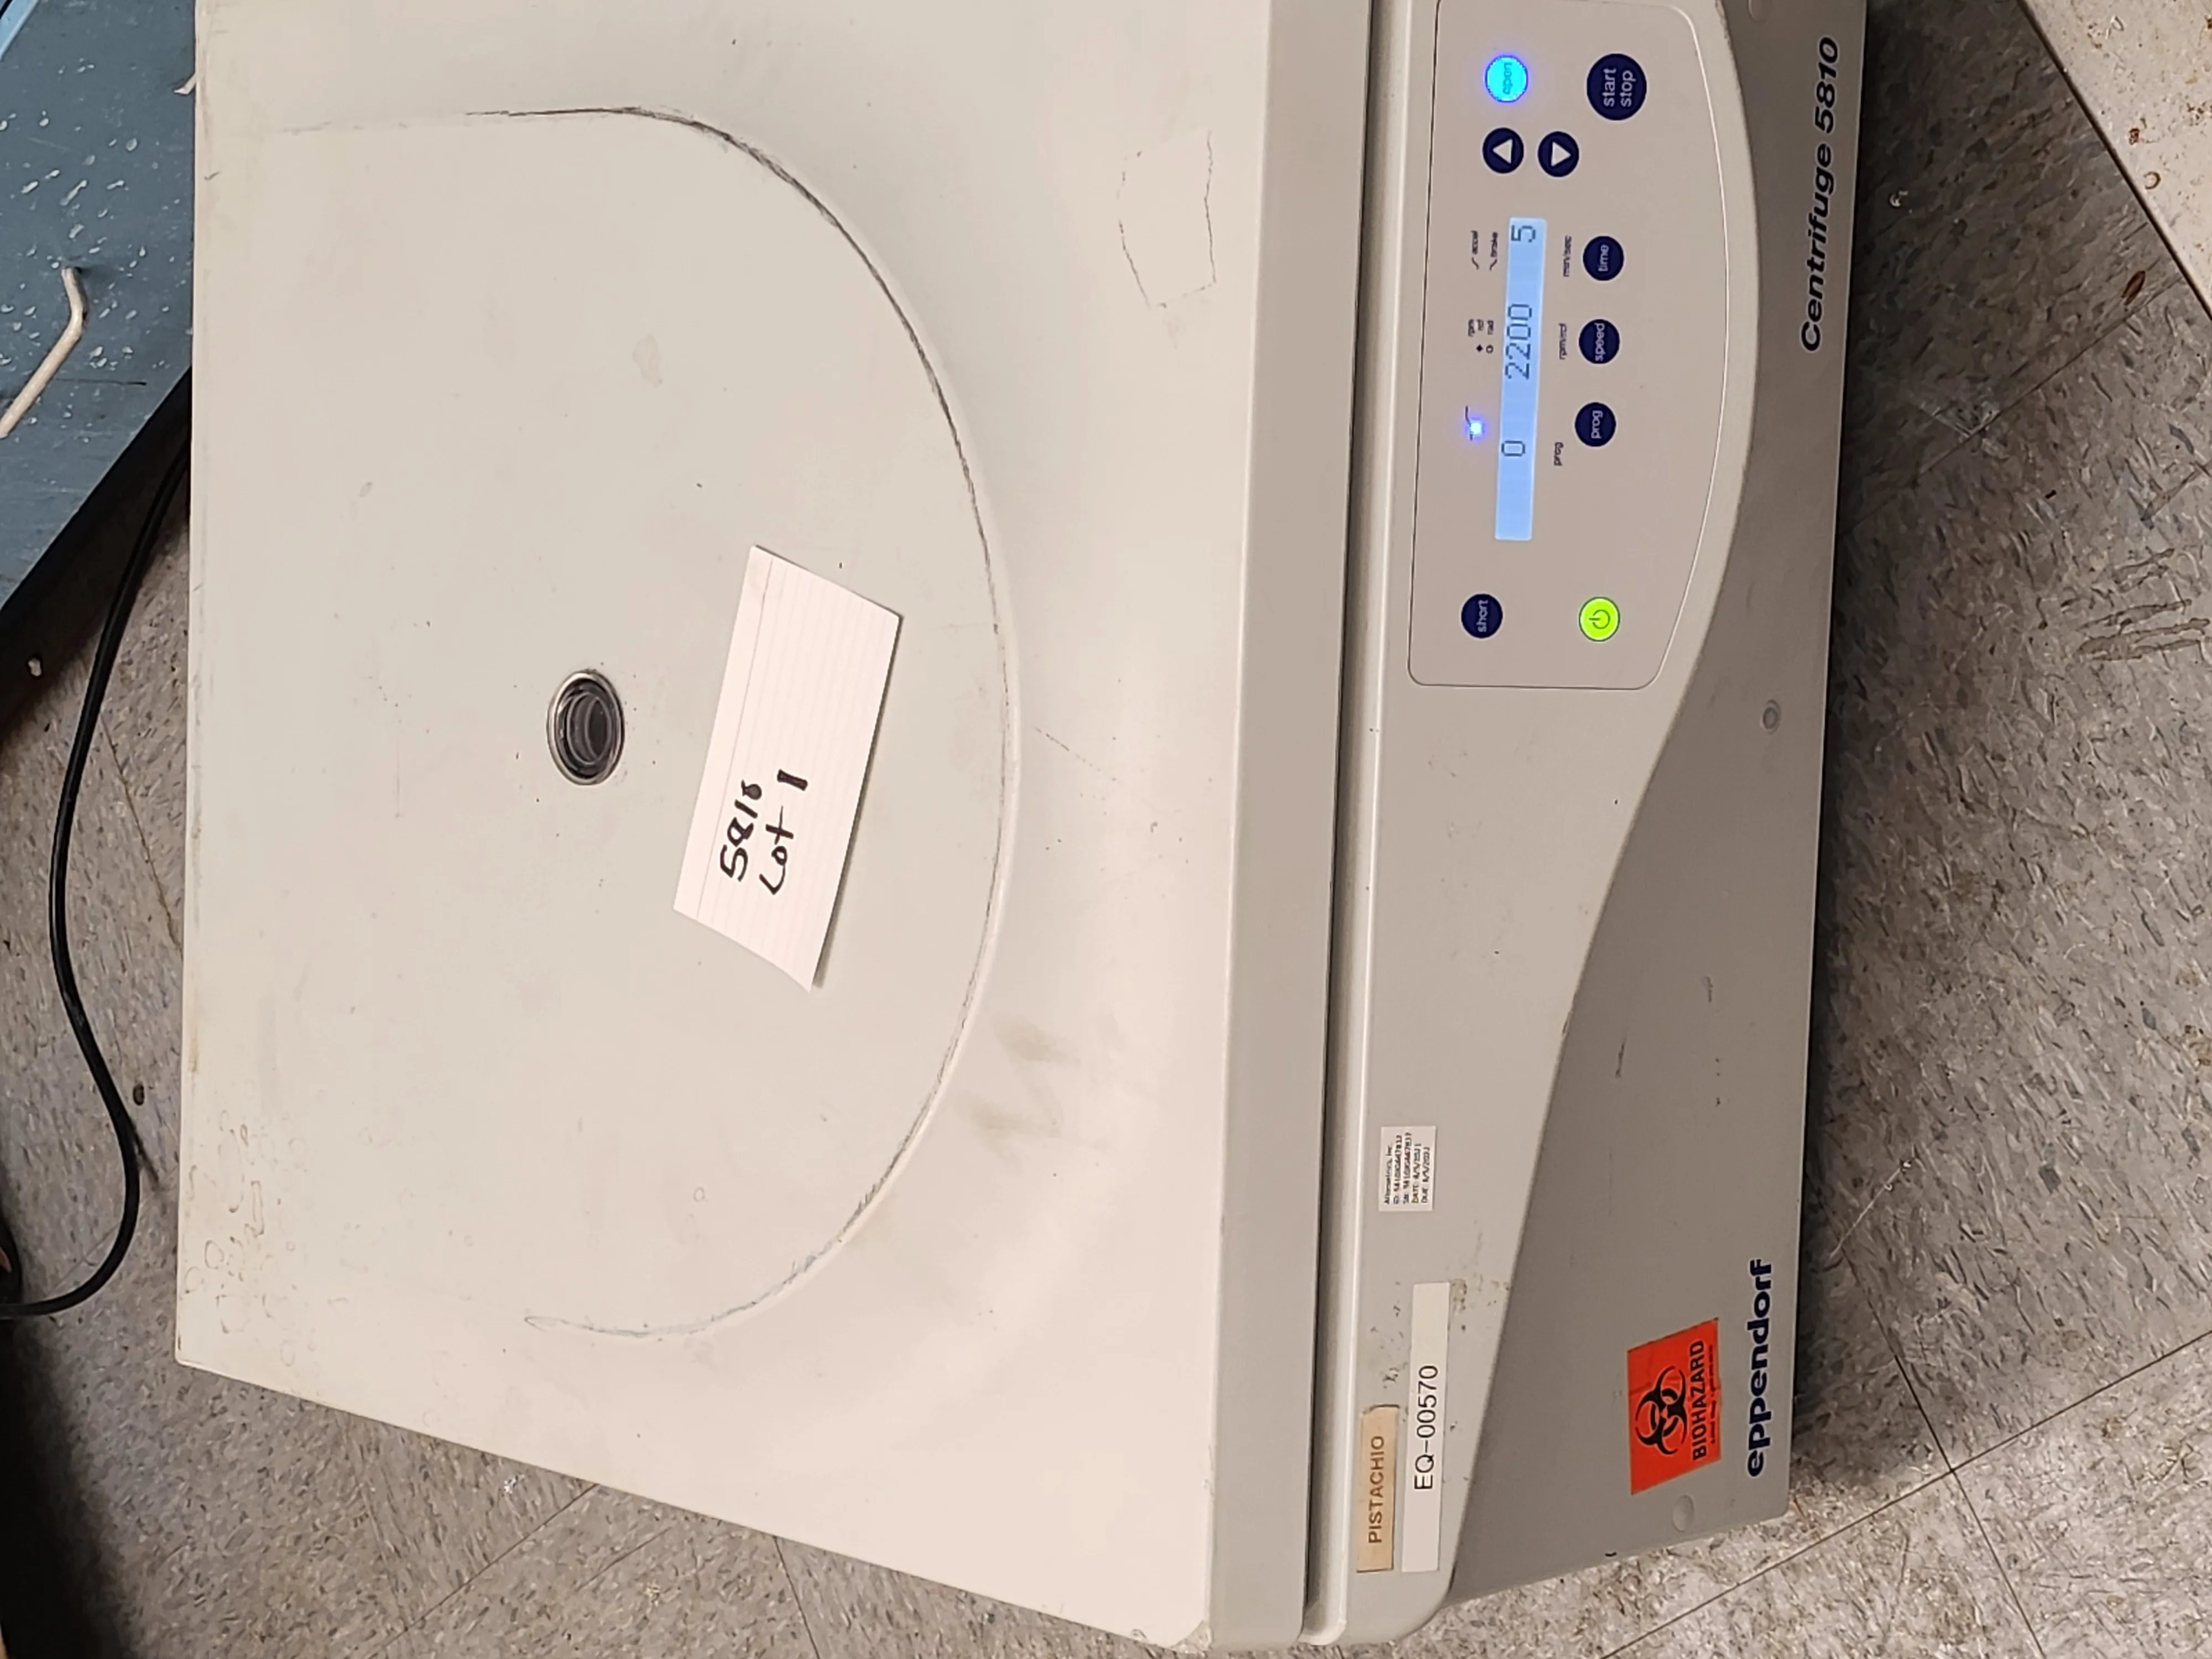 Eppendorf 5810 centrifuge, With, In excellent condition 96 well Plate rotor